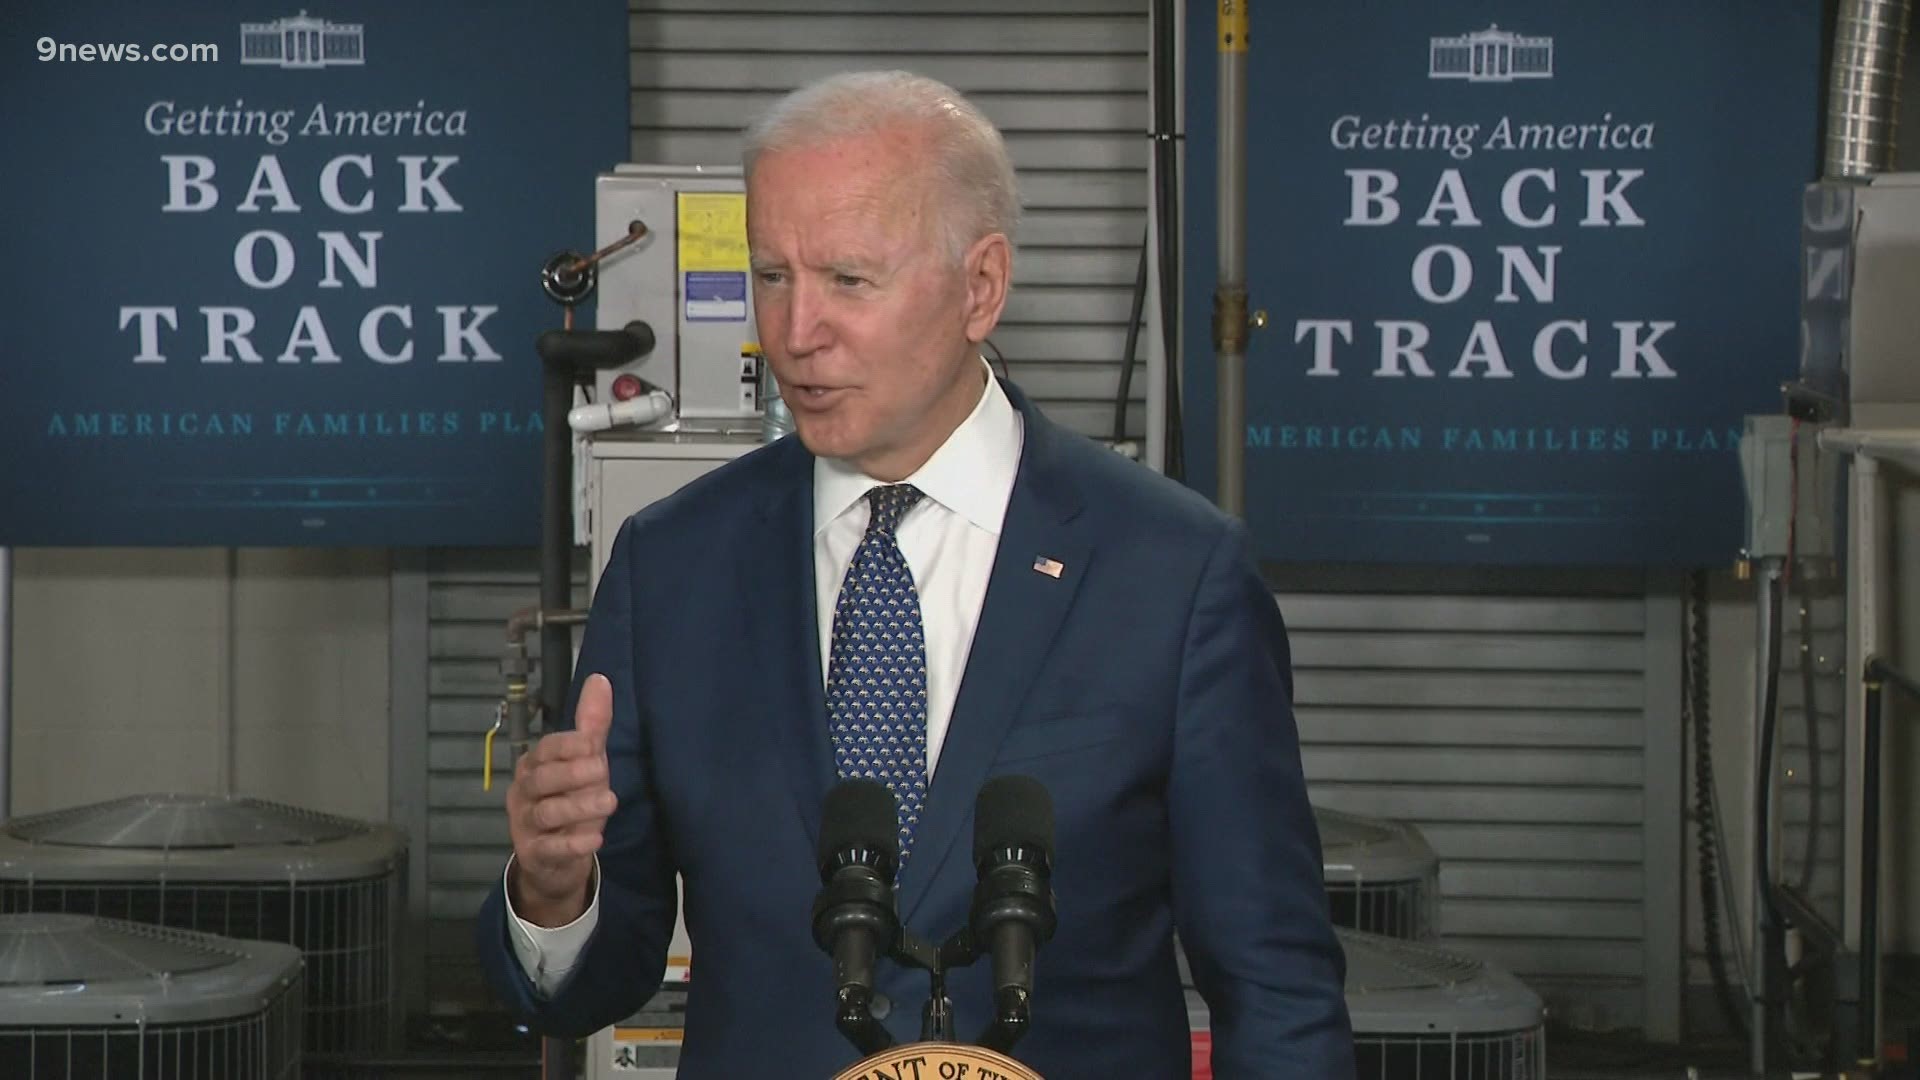 President Biden is expected to update federal guidance on pandemic recovery Tuesday as more places around the country relax COVID-19 measures.